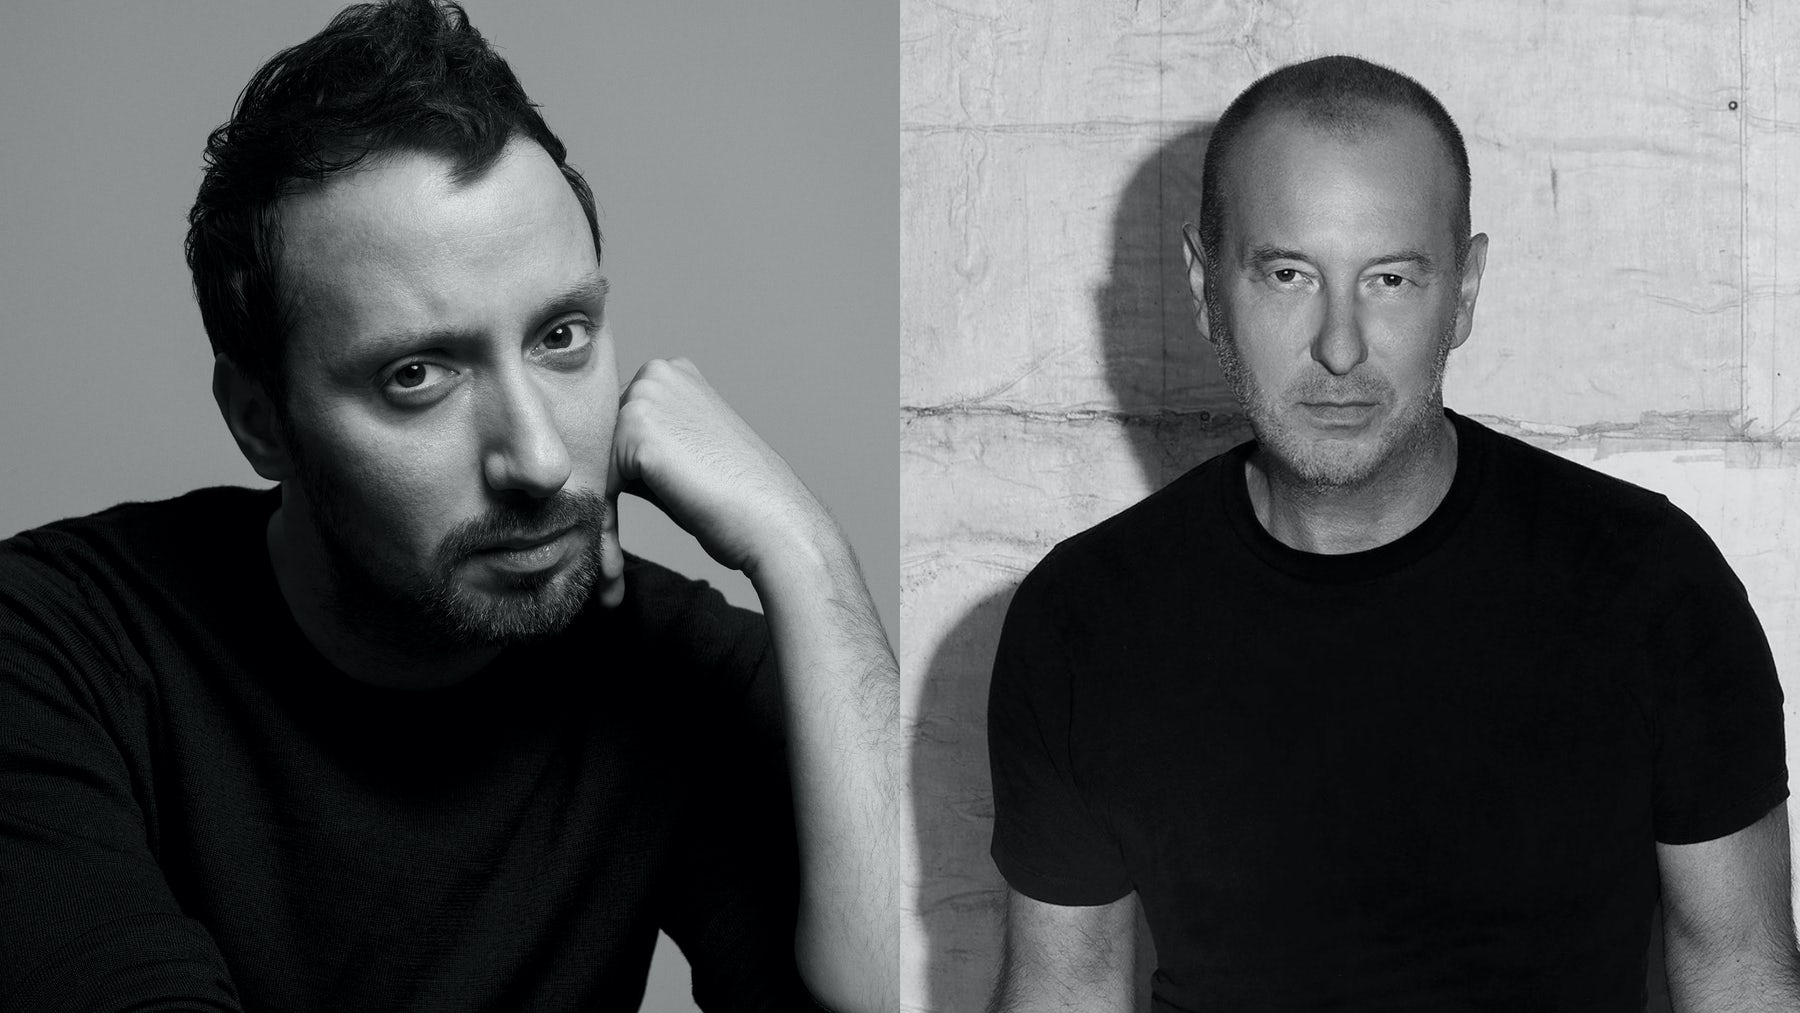 We're Drawn to a Certain Rawness': Designer-Turned-Artist Helmut Lang and  Anthony Vaccarello on Their New Collaboration